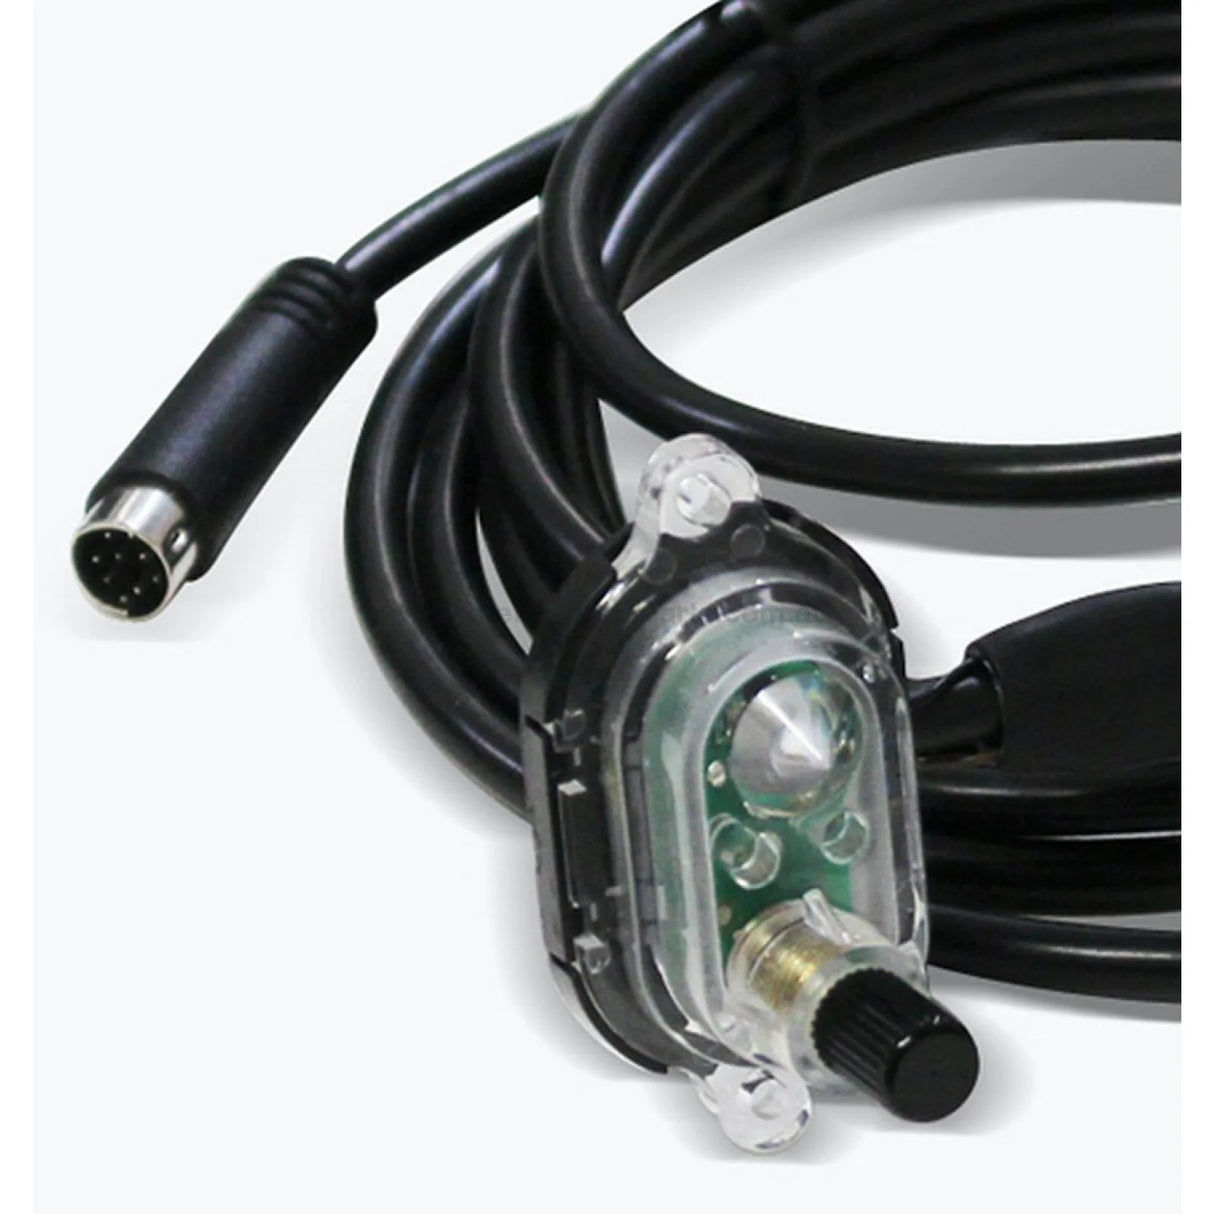 SpaNET XS-2000, XS-3000, XS-4000 Optical Water Sensor and Thermistor Assembly - Heater and Spa Parts